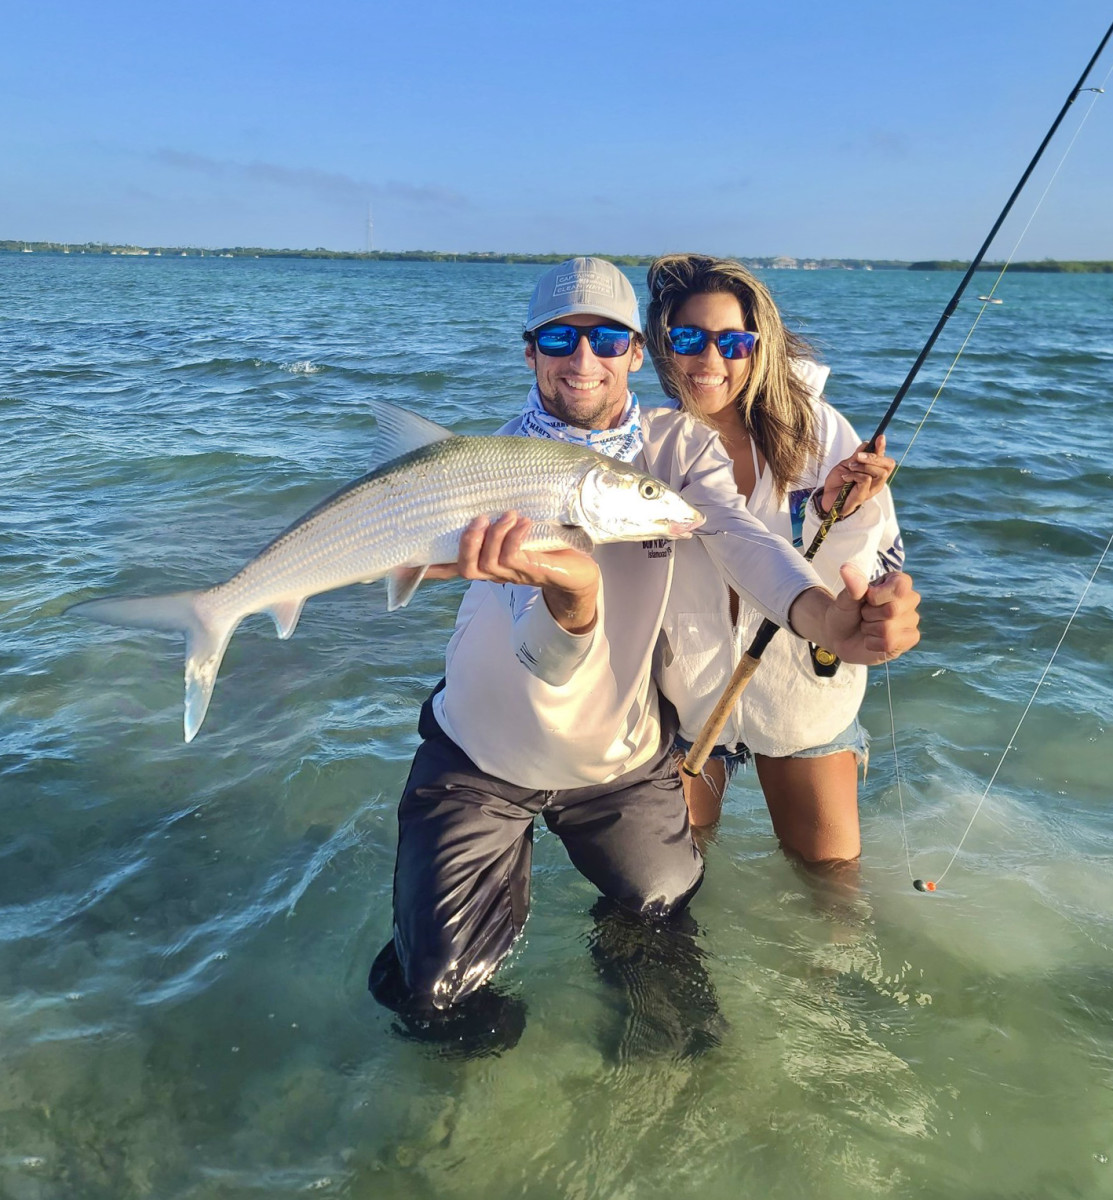 DeGruchy says she loves the laid-back Florida Keys vibe, and of course, the fishing. 